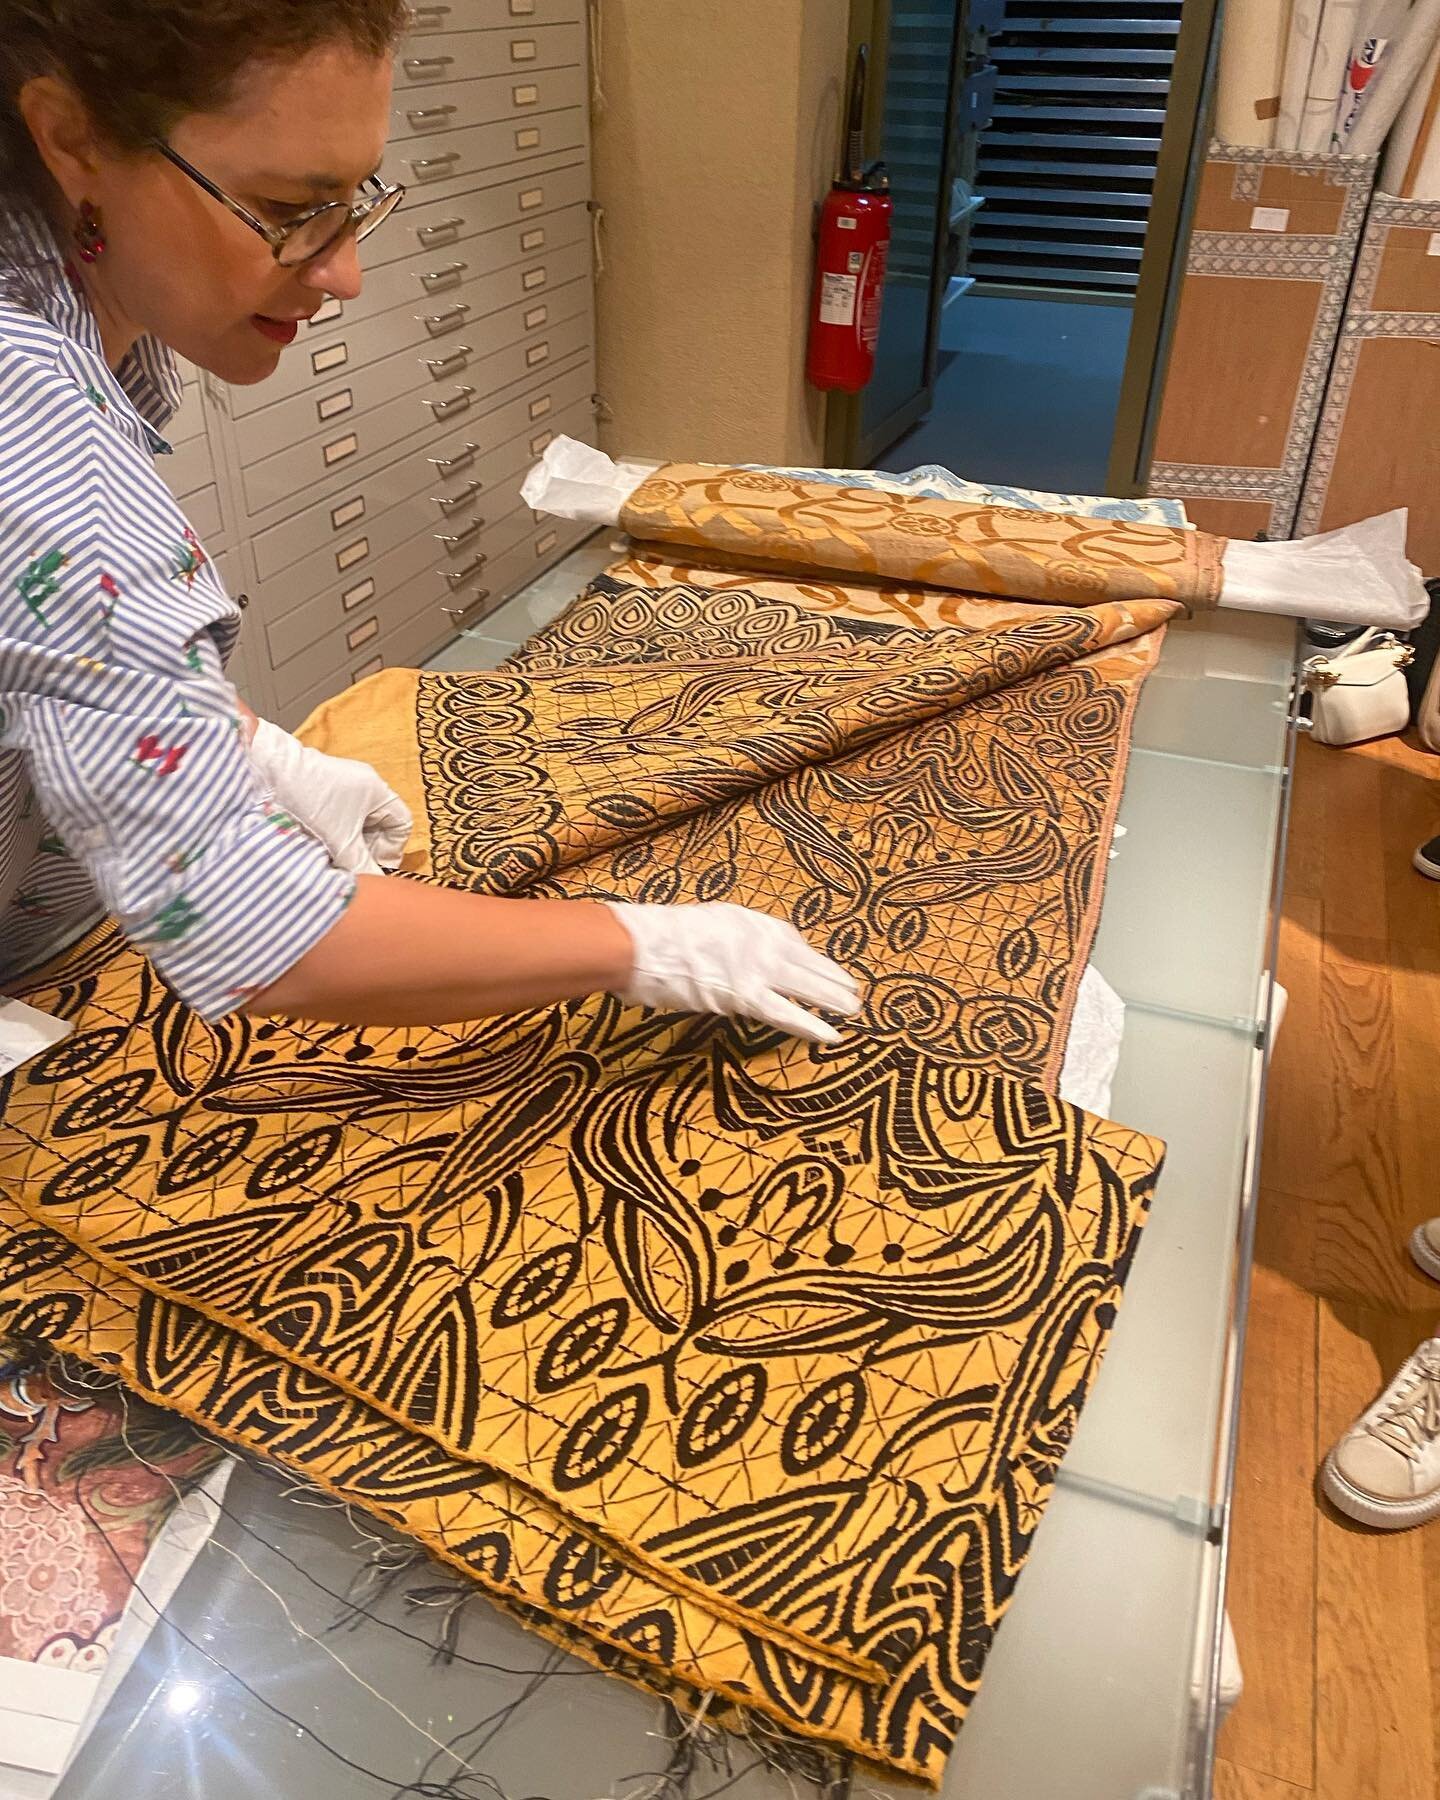 Had the amazing opportunity to visit the Pierre Frey archives this summer in Paris! Still family owned, the house of Pierre Frey has been creating and weaving their iconic fabrics for generations.
With over 80,000 samples, the Pierre Frey fabric arch